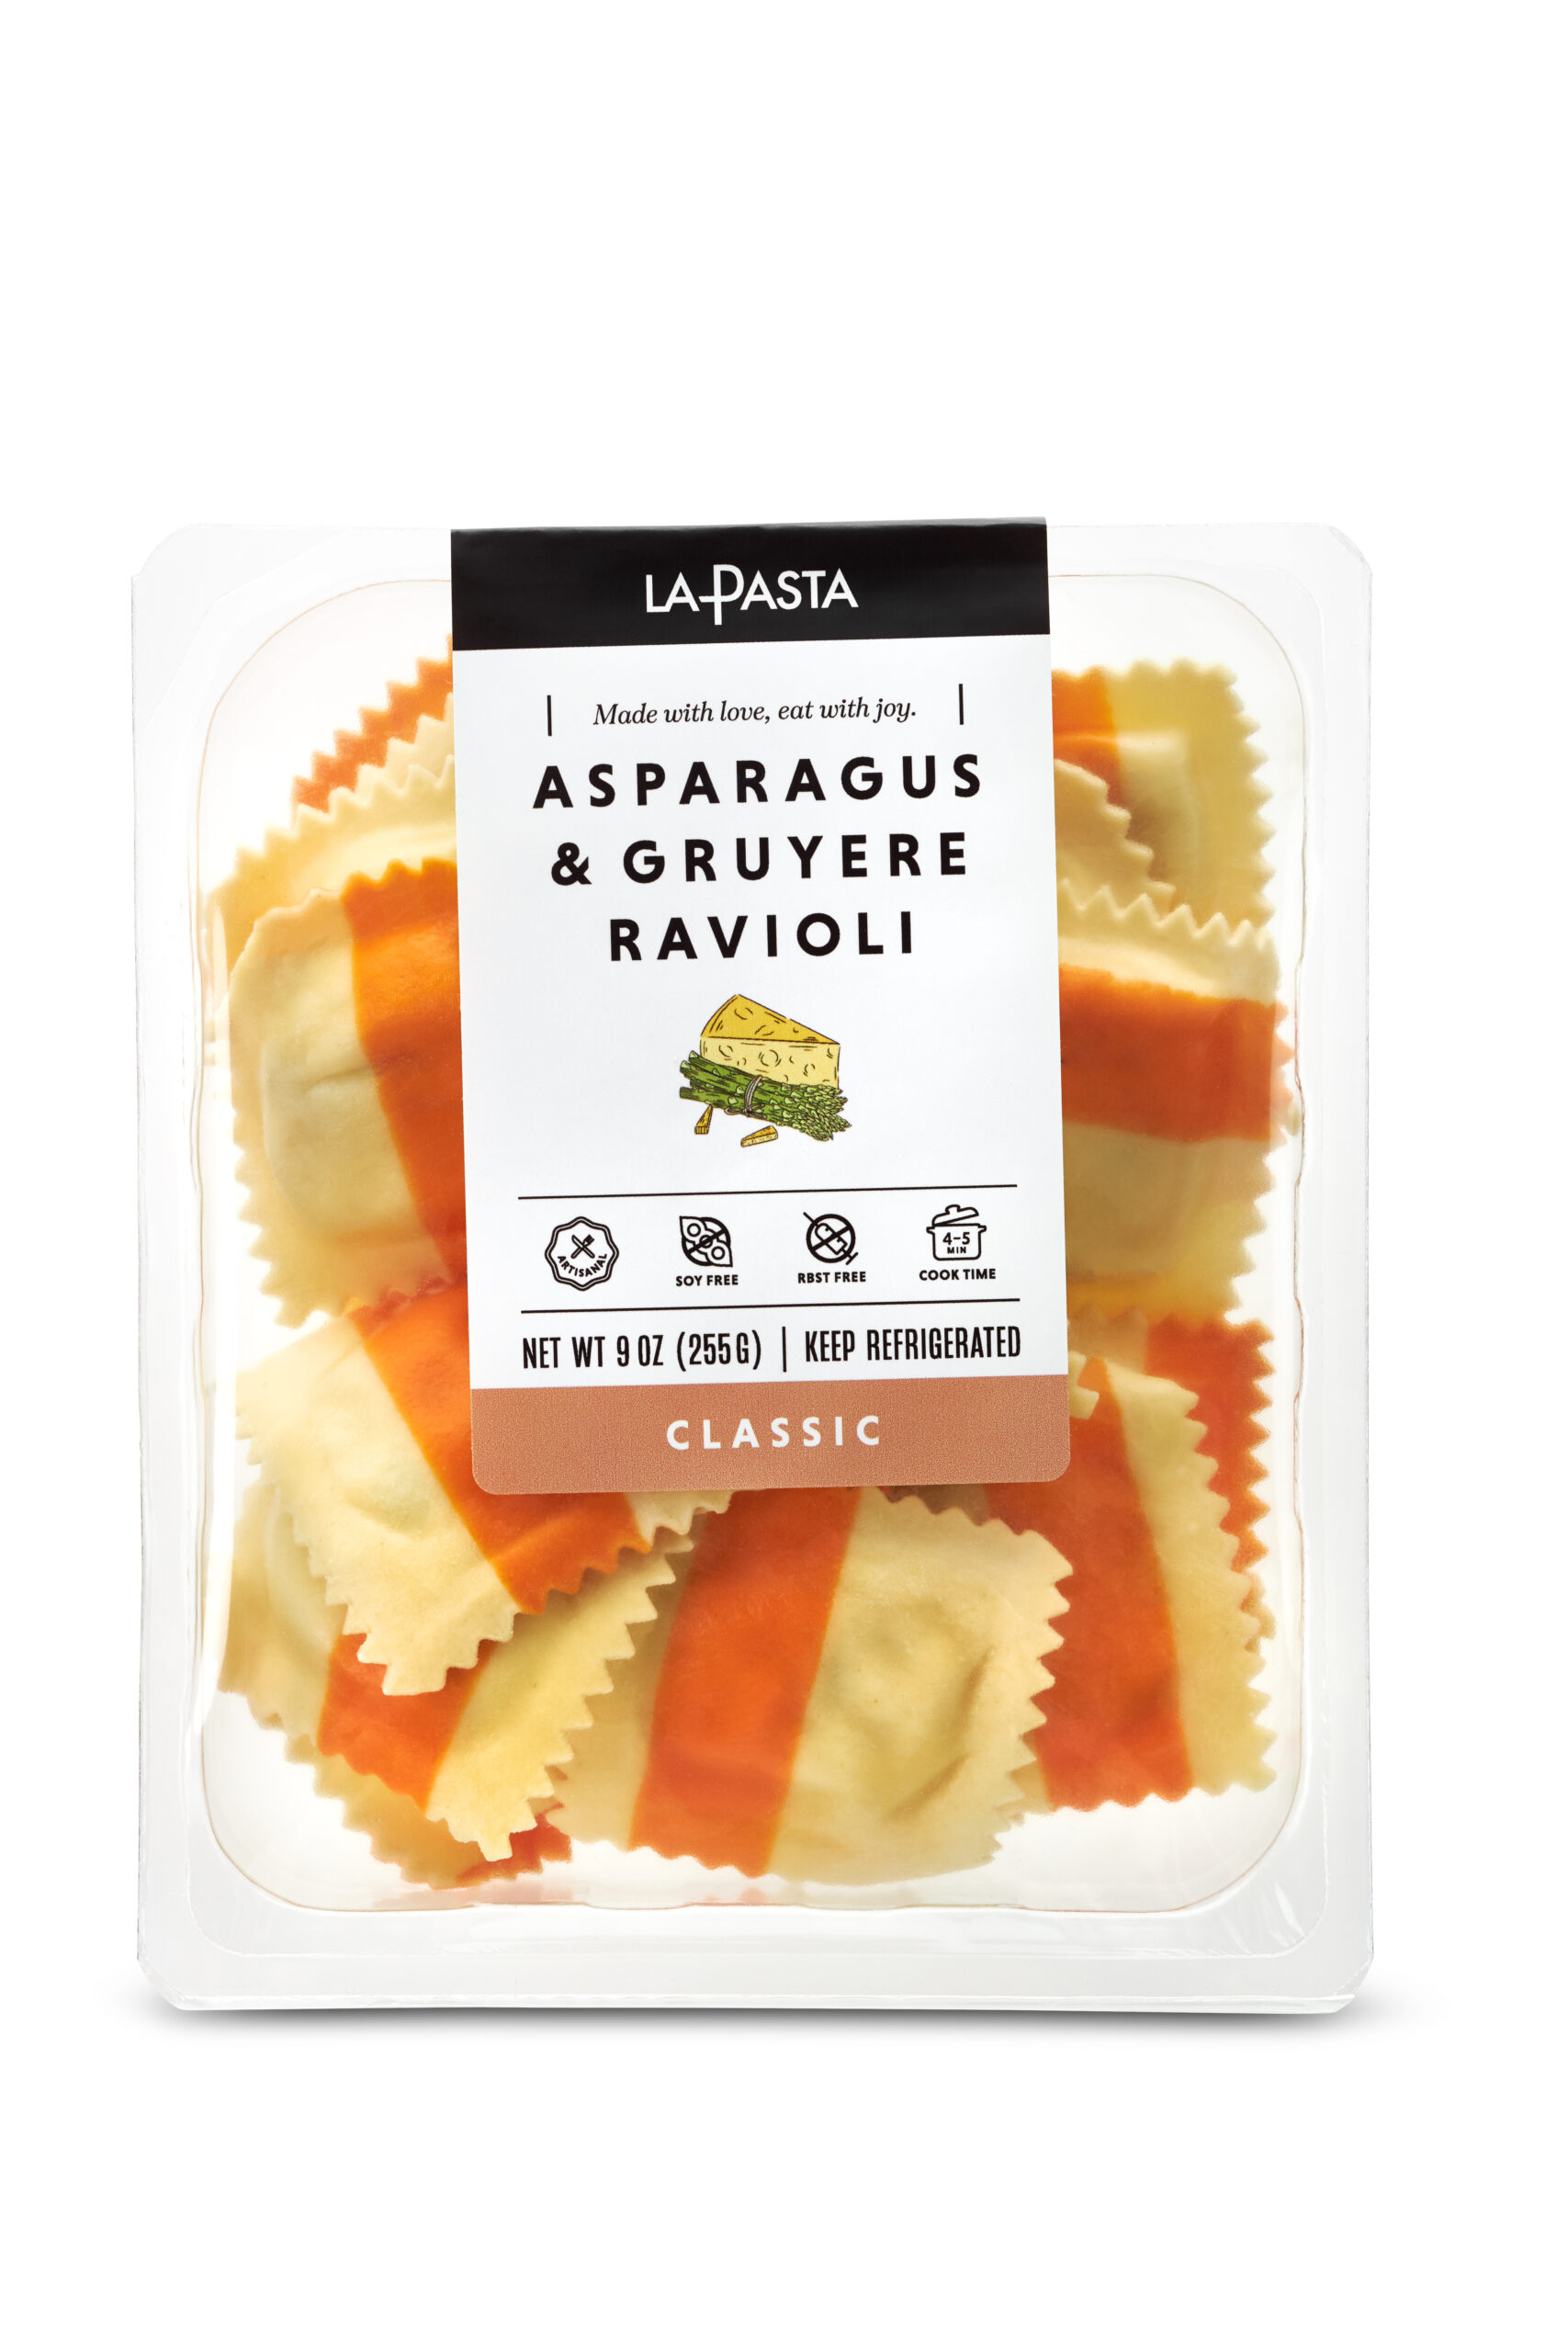 A package of ravioli with asparagus and orange.